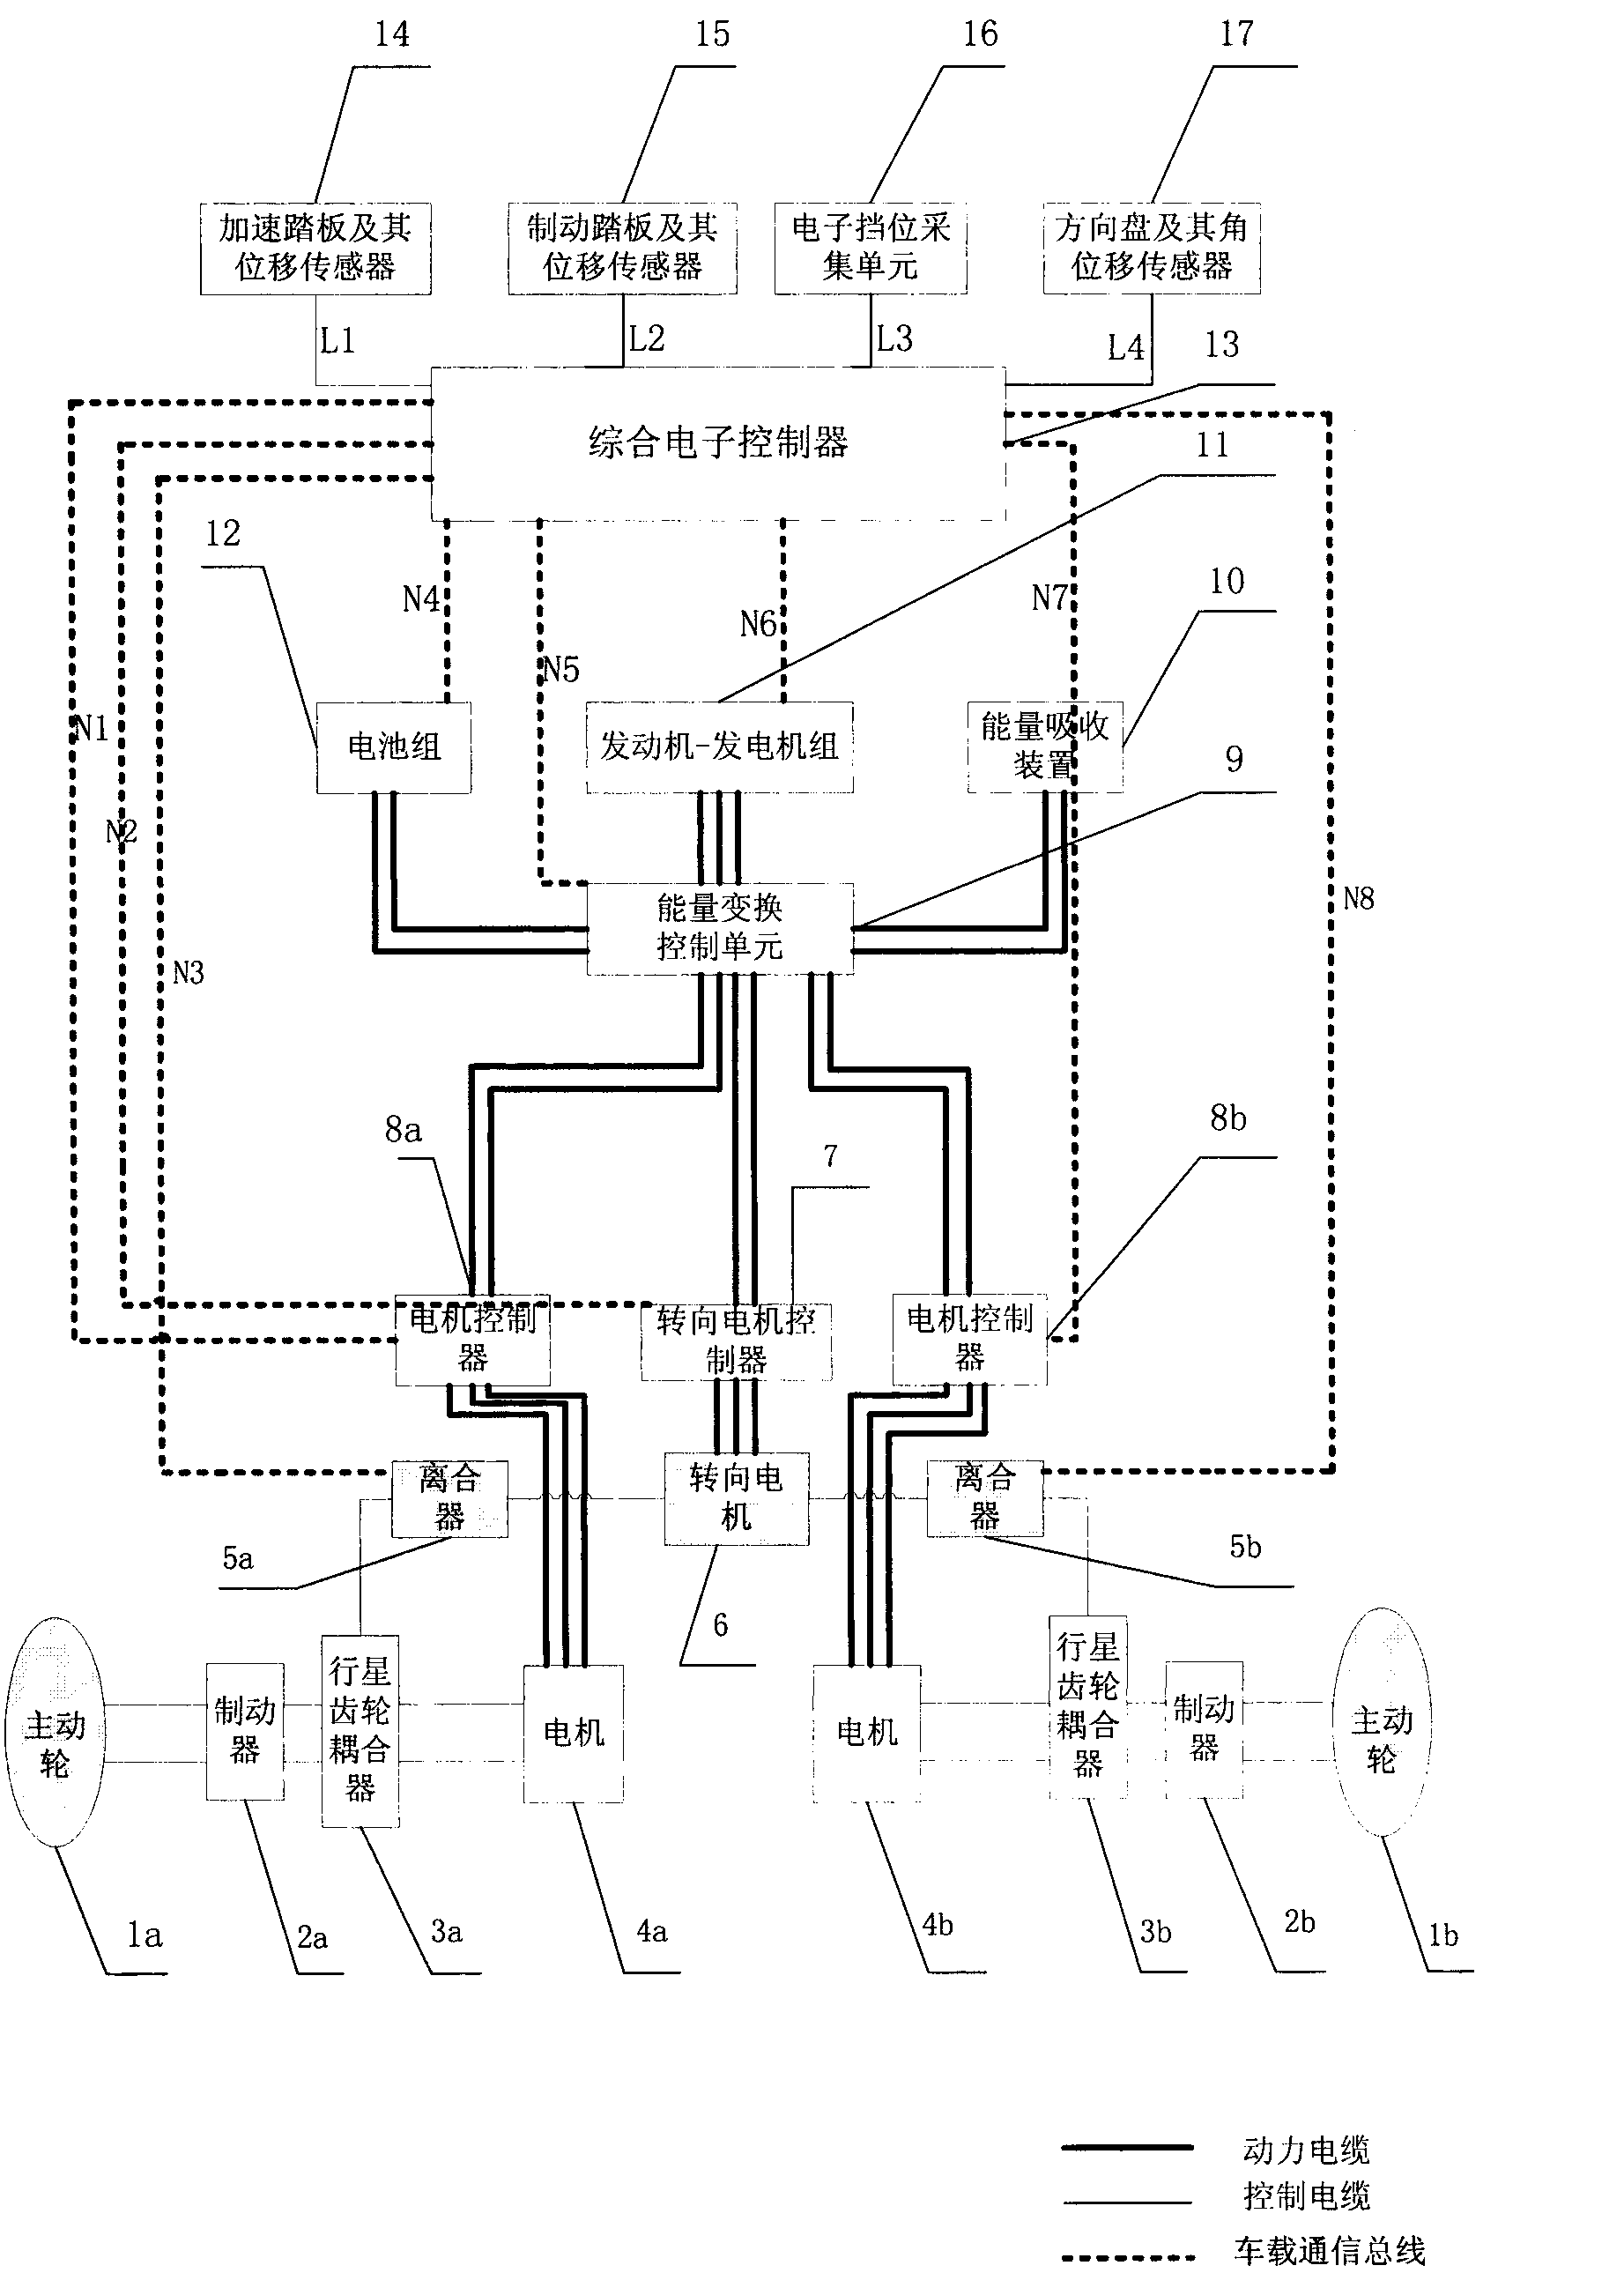 Steering system with coupling of electric drive tracked vehicle steering motor and unilateral drive motor